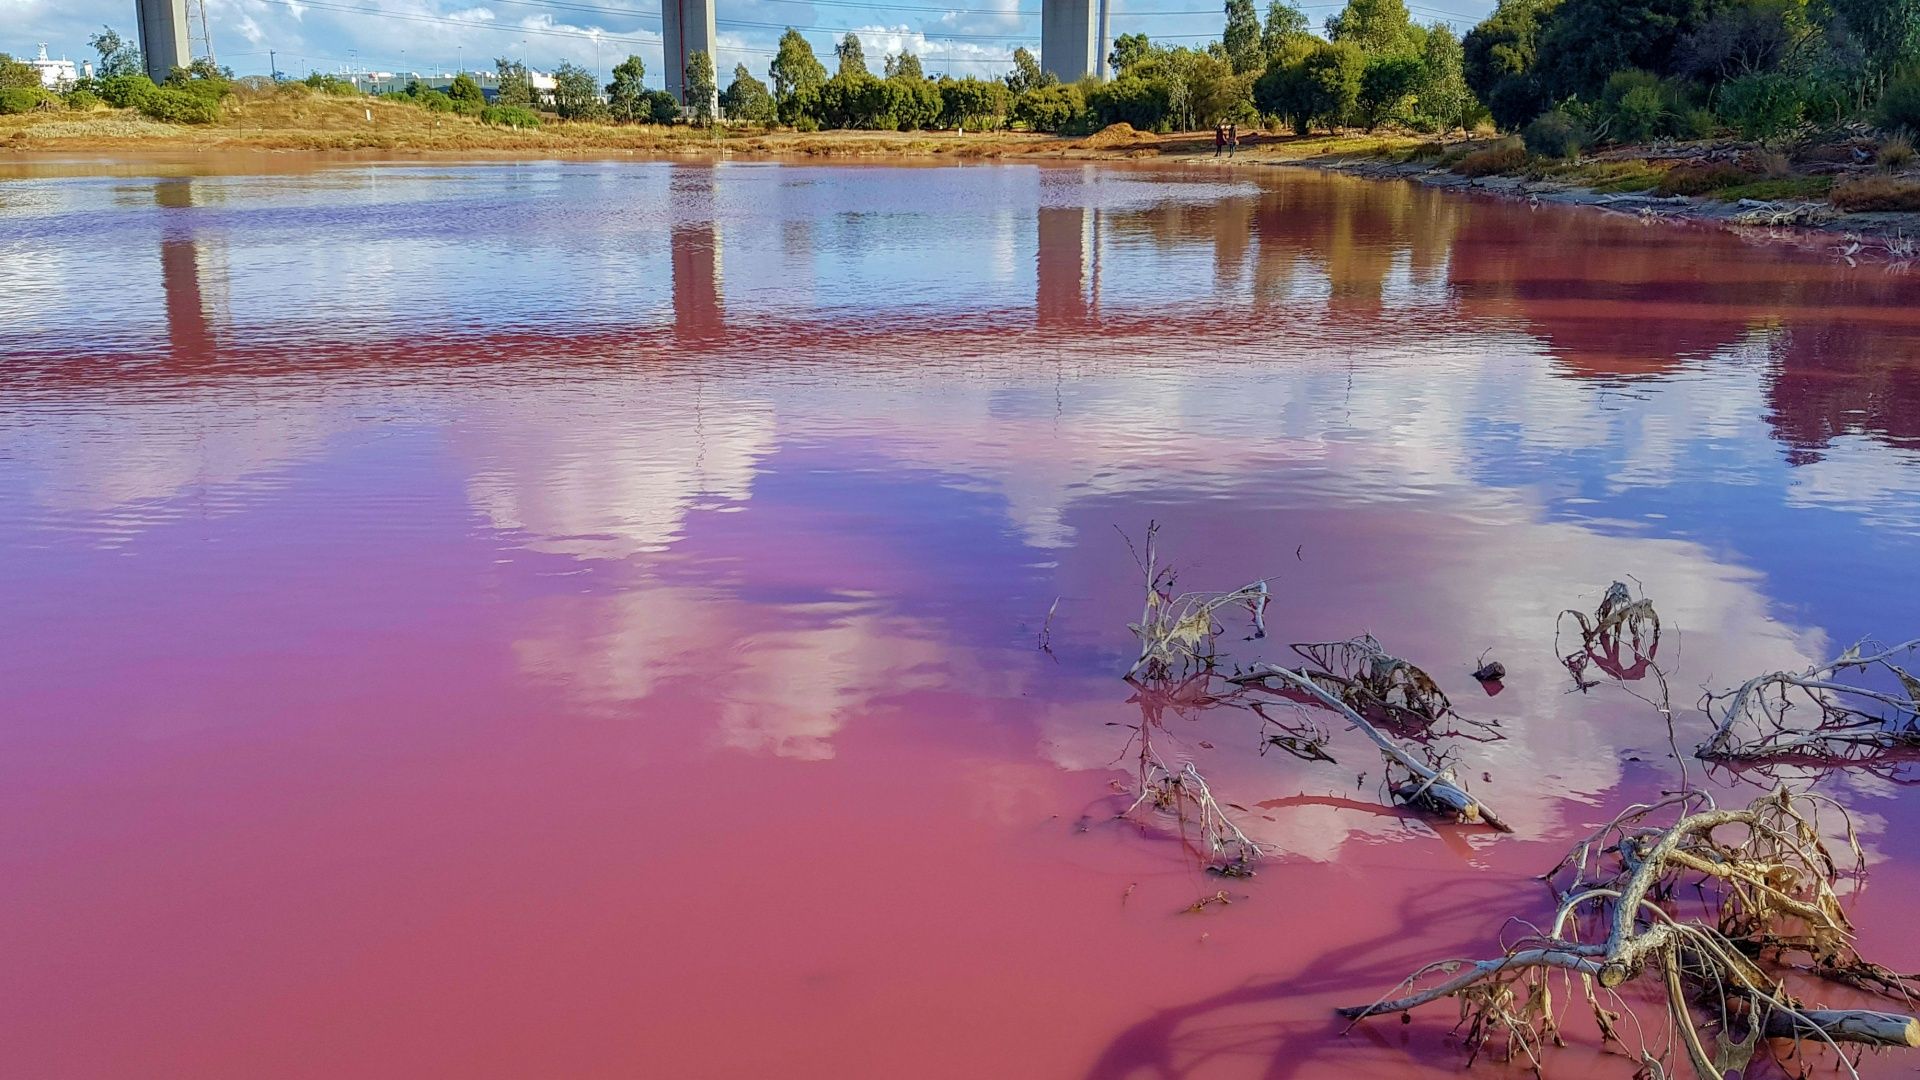 Just Landed: An urban lake in Australia has turned pink